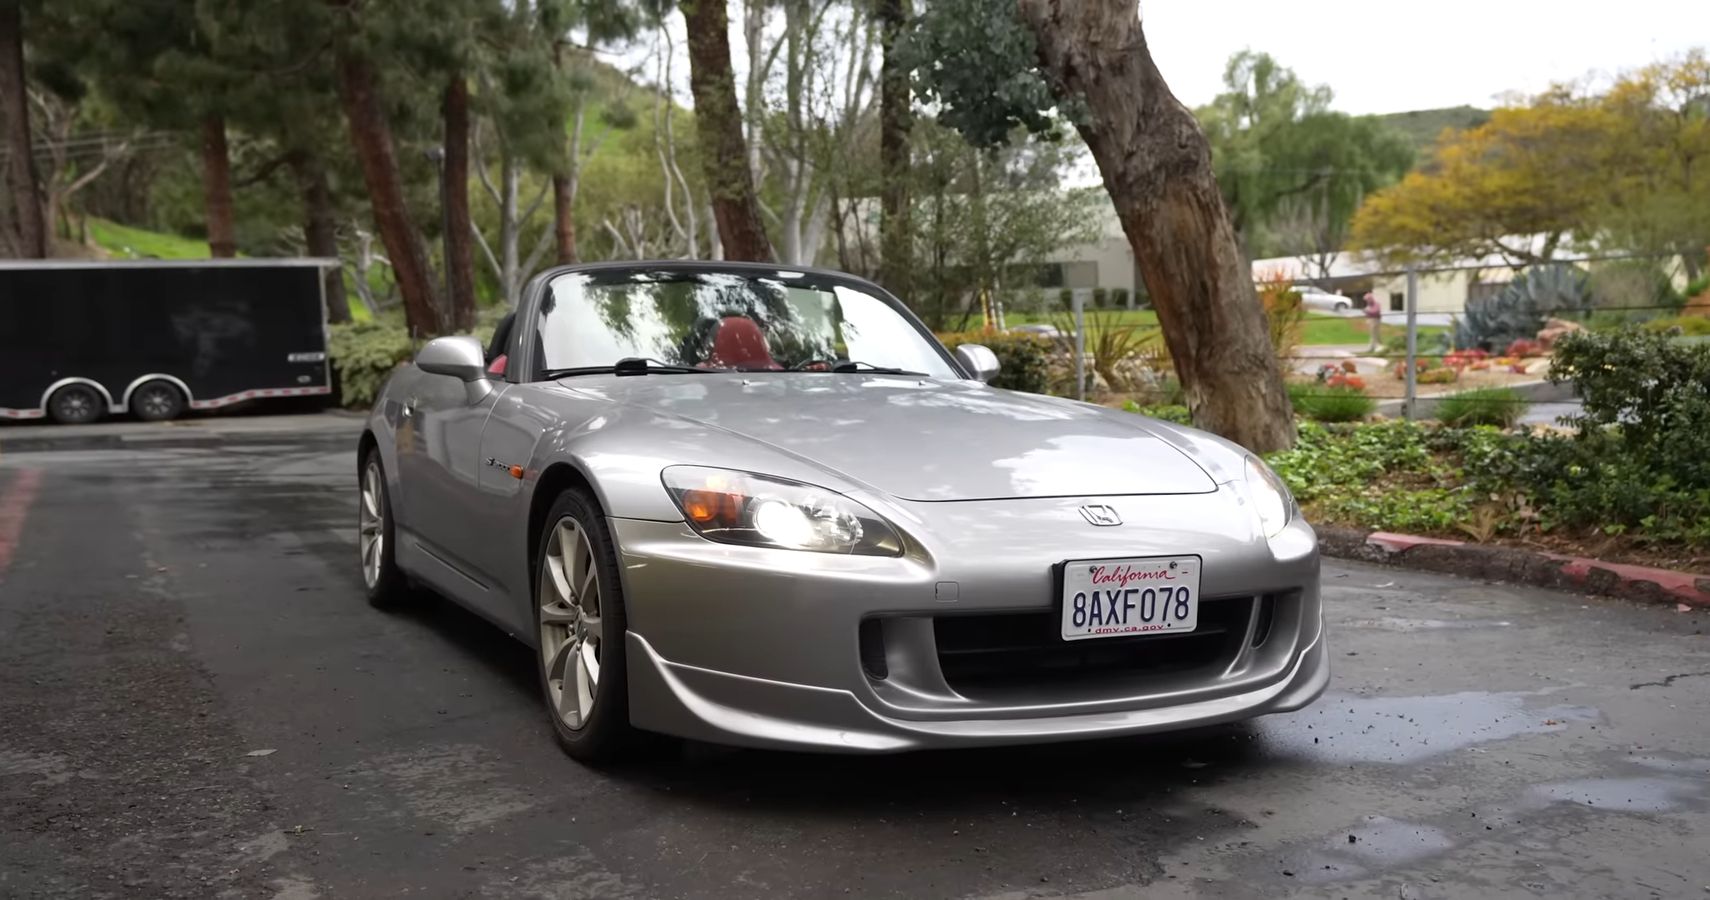 Another Fast And Furious Build? Throtl Debuts Their New Honda S2000 Project Car